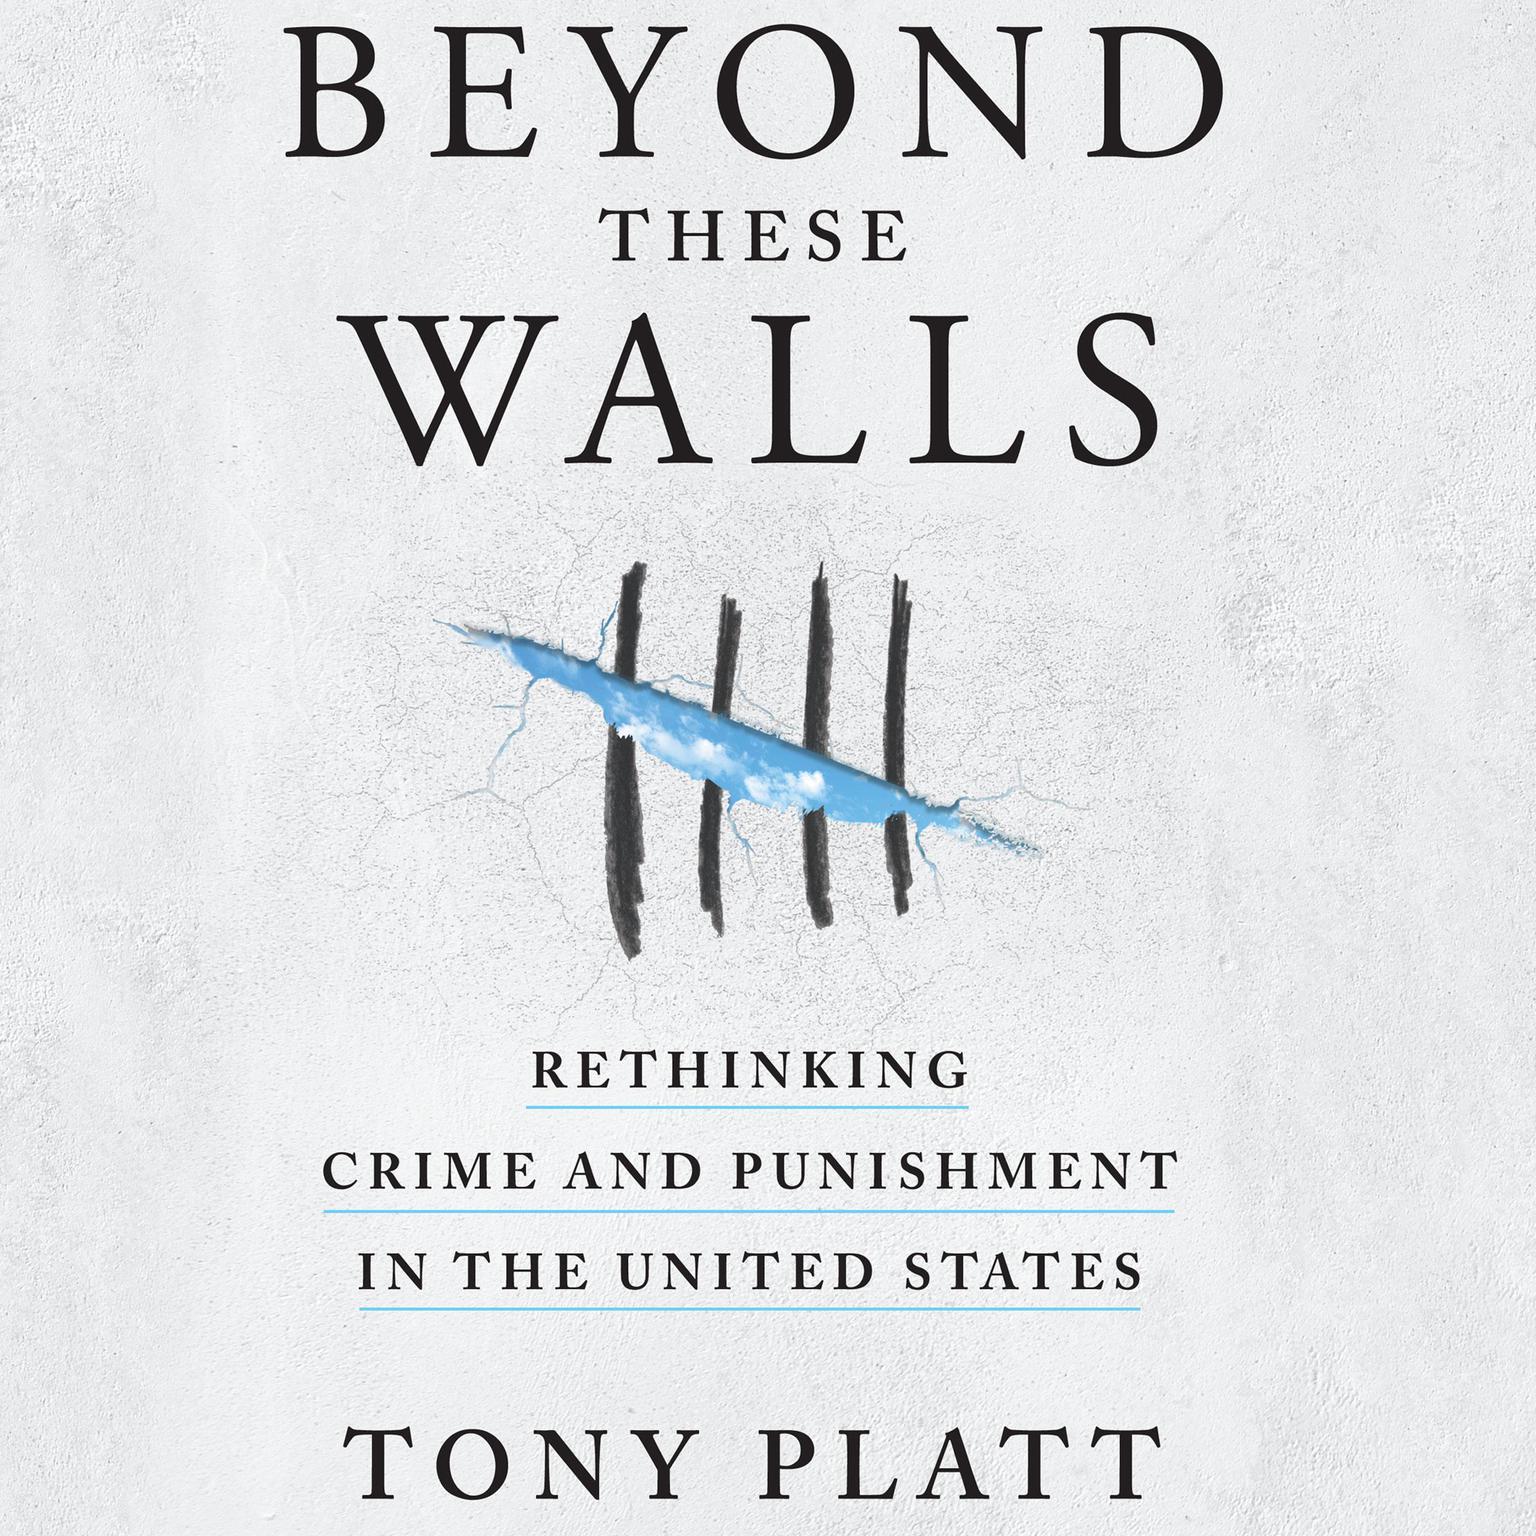 Beyond These Walls: Rethinking Crime and Punishment in the United States Audiobook, by Tony Platt